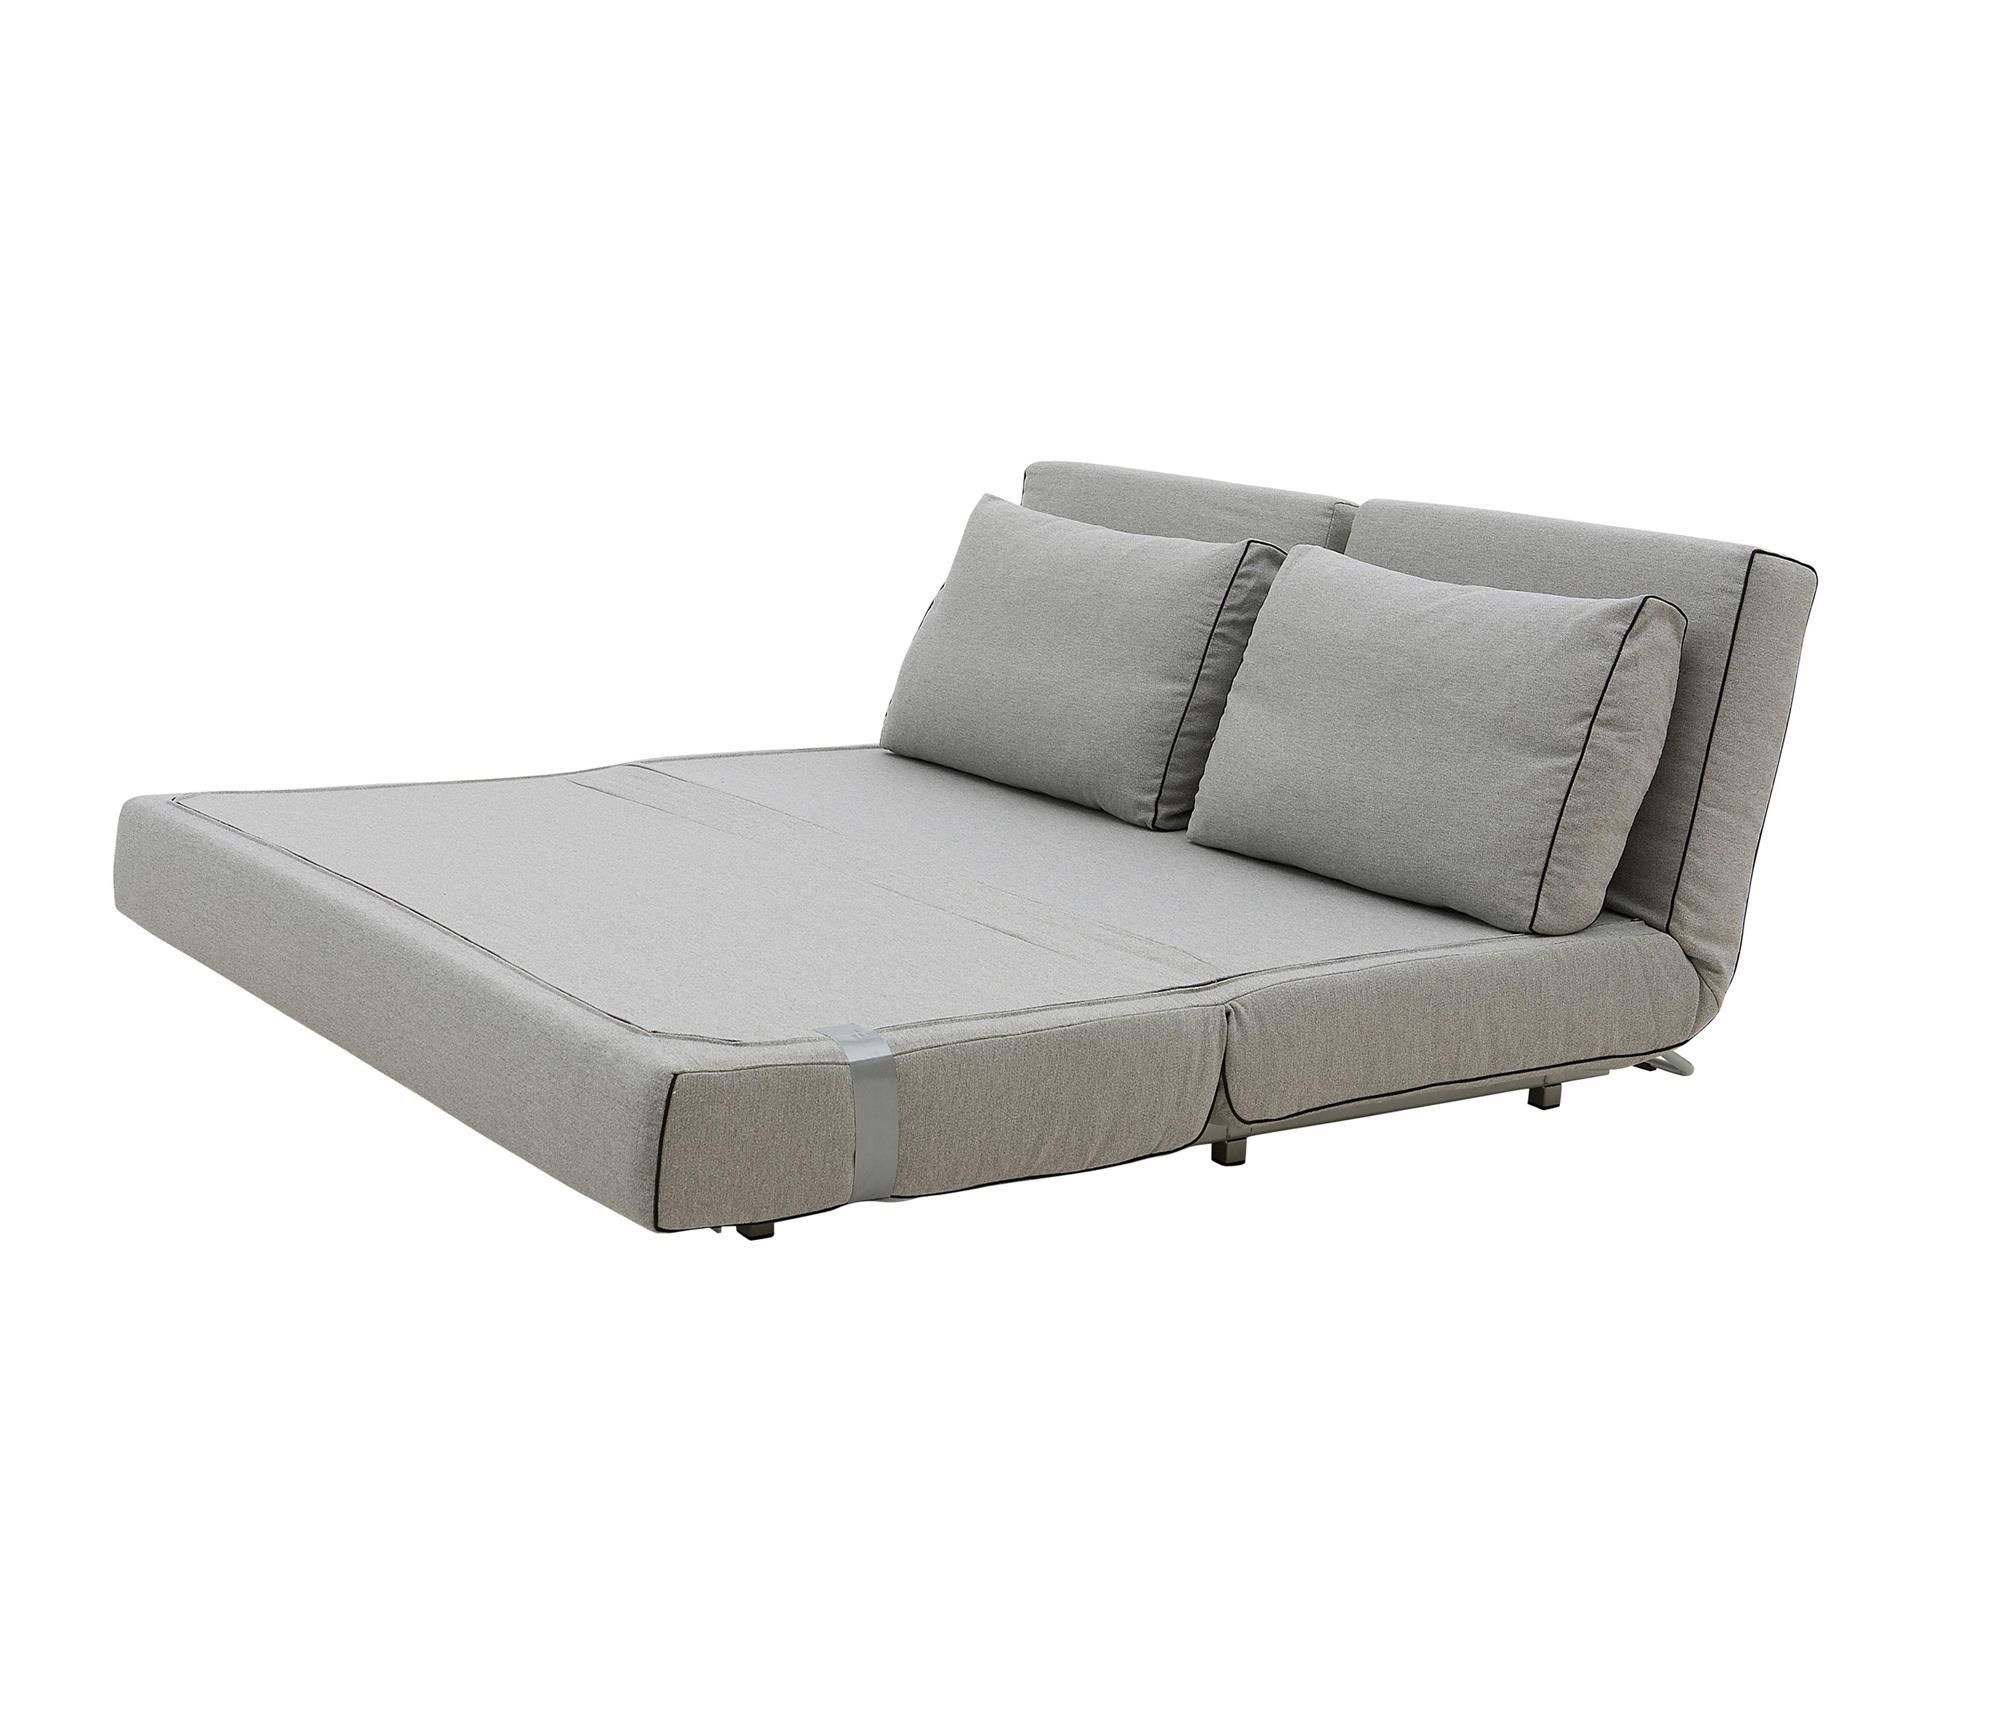 City Sofa – Sofa Beds From Softline A/s | Architonic Pertaining To City Sofa Beds (View 11 of 20)